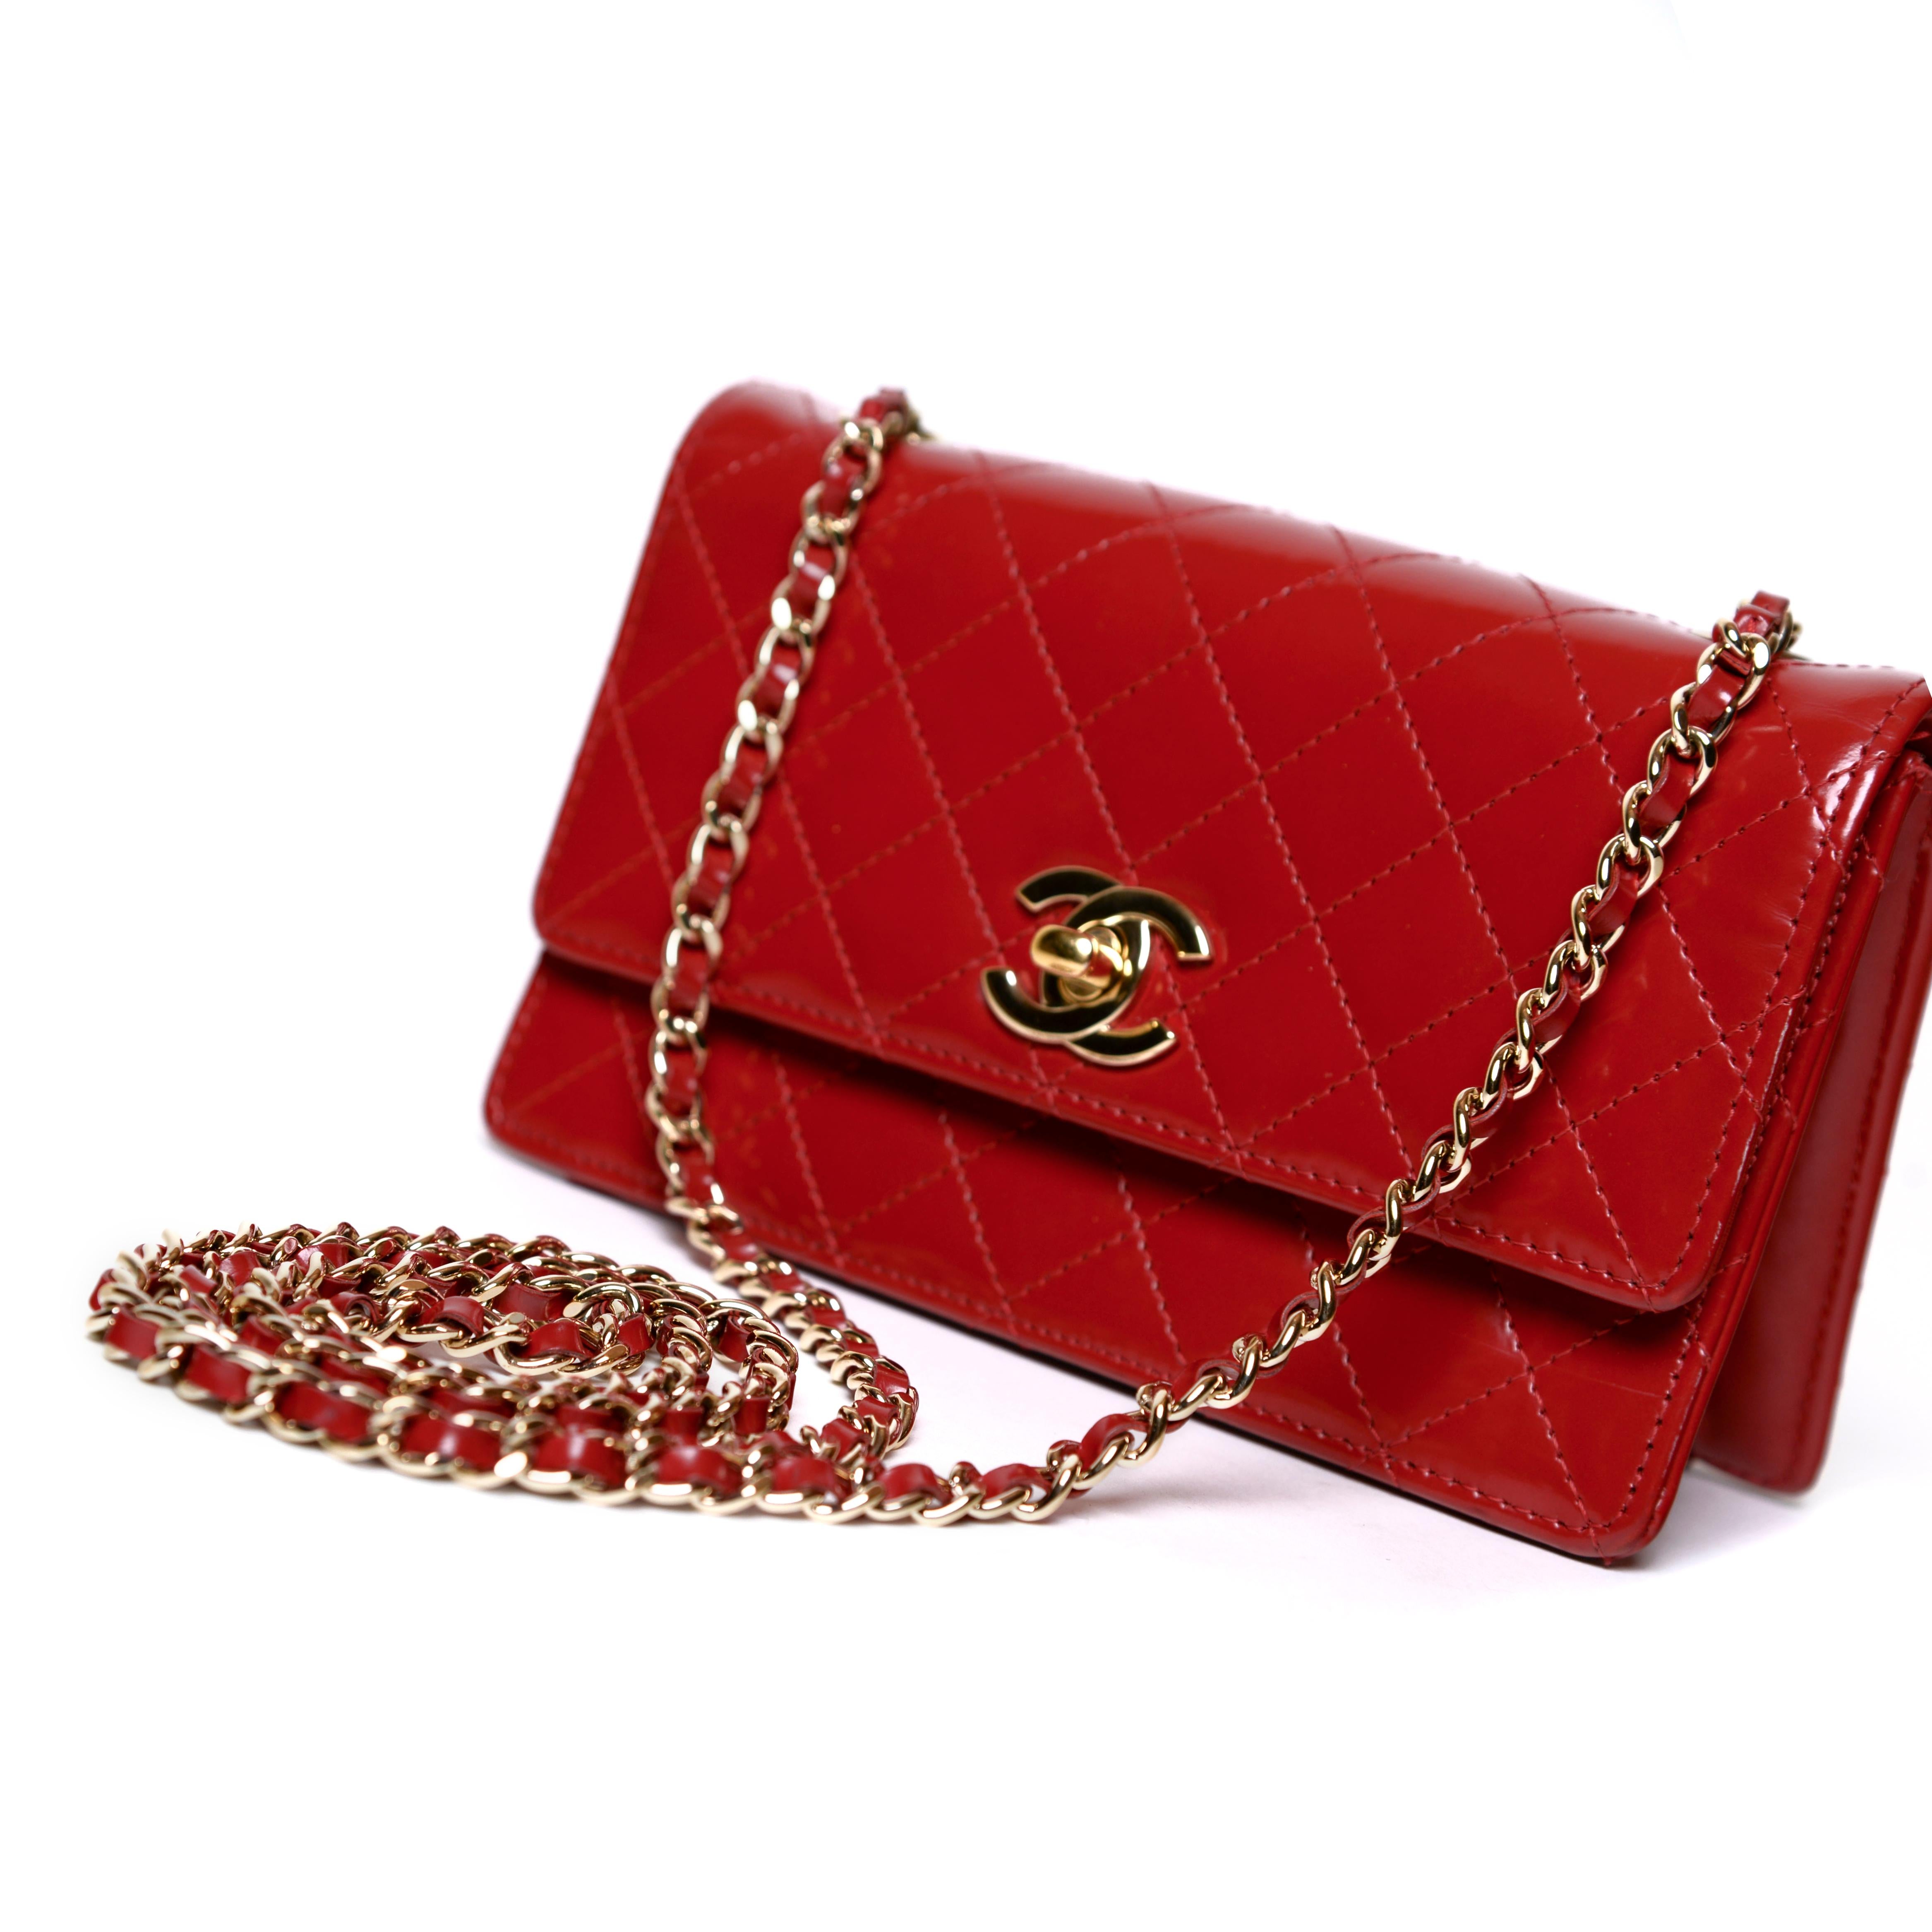 Women's or Men's Chanel Classic Red Mini Flap Bag Patent Leather For Sale